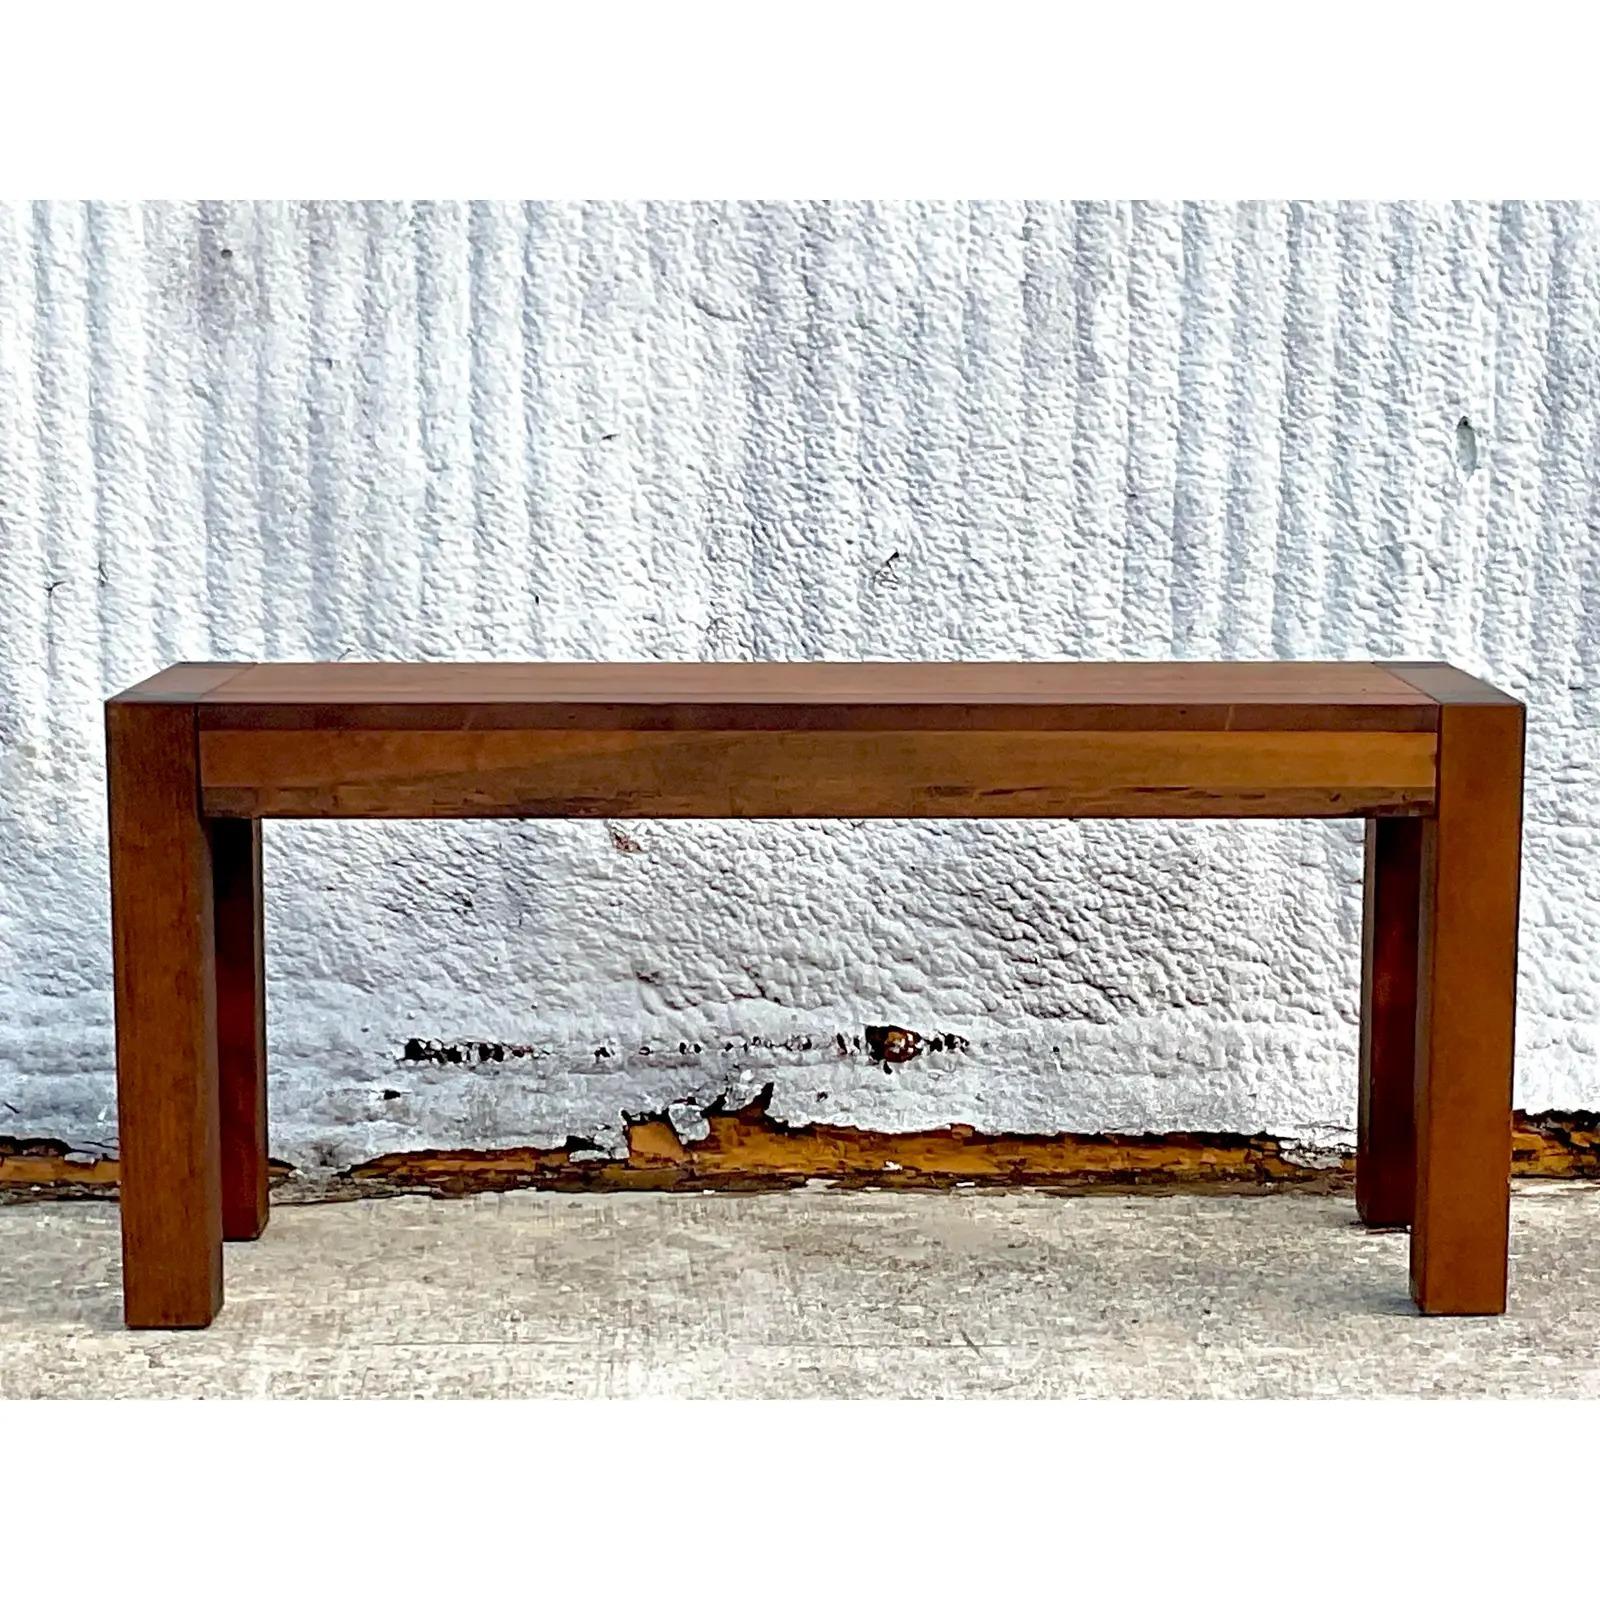 A fantastic vintage Boho console table. Beautiful block wood construction in a chic Parsons style. Great wood grain detail. A solid piece of furniture. Acquired from a Palm Beach estate.